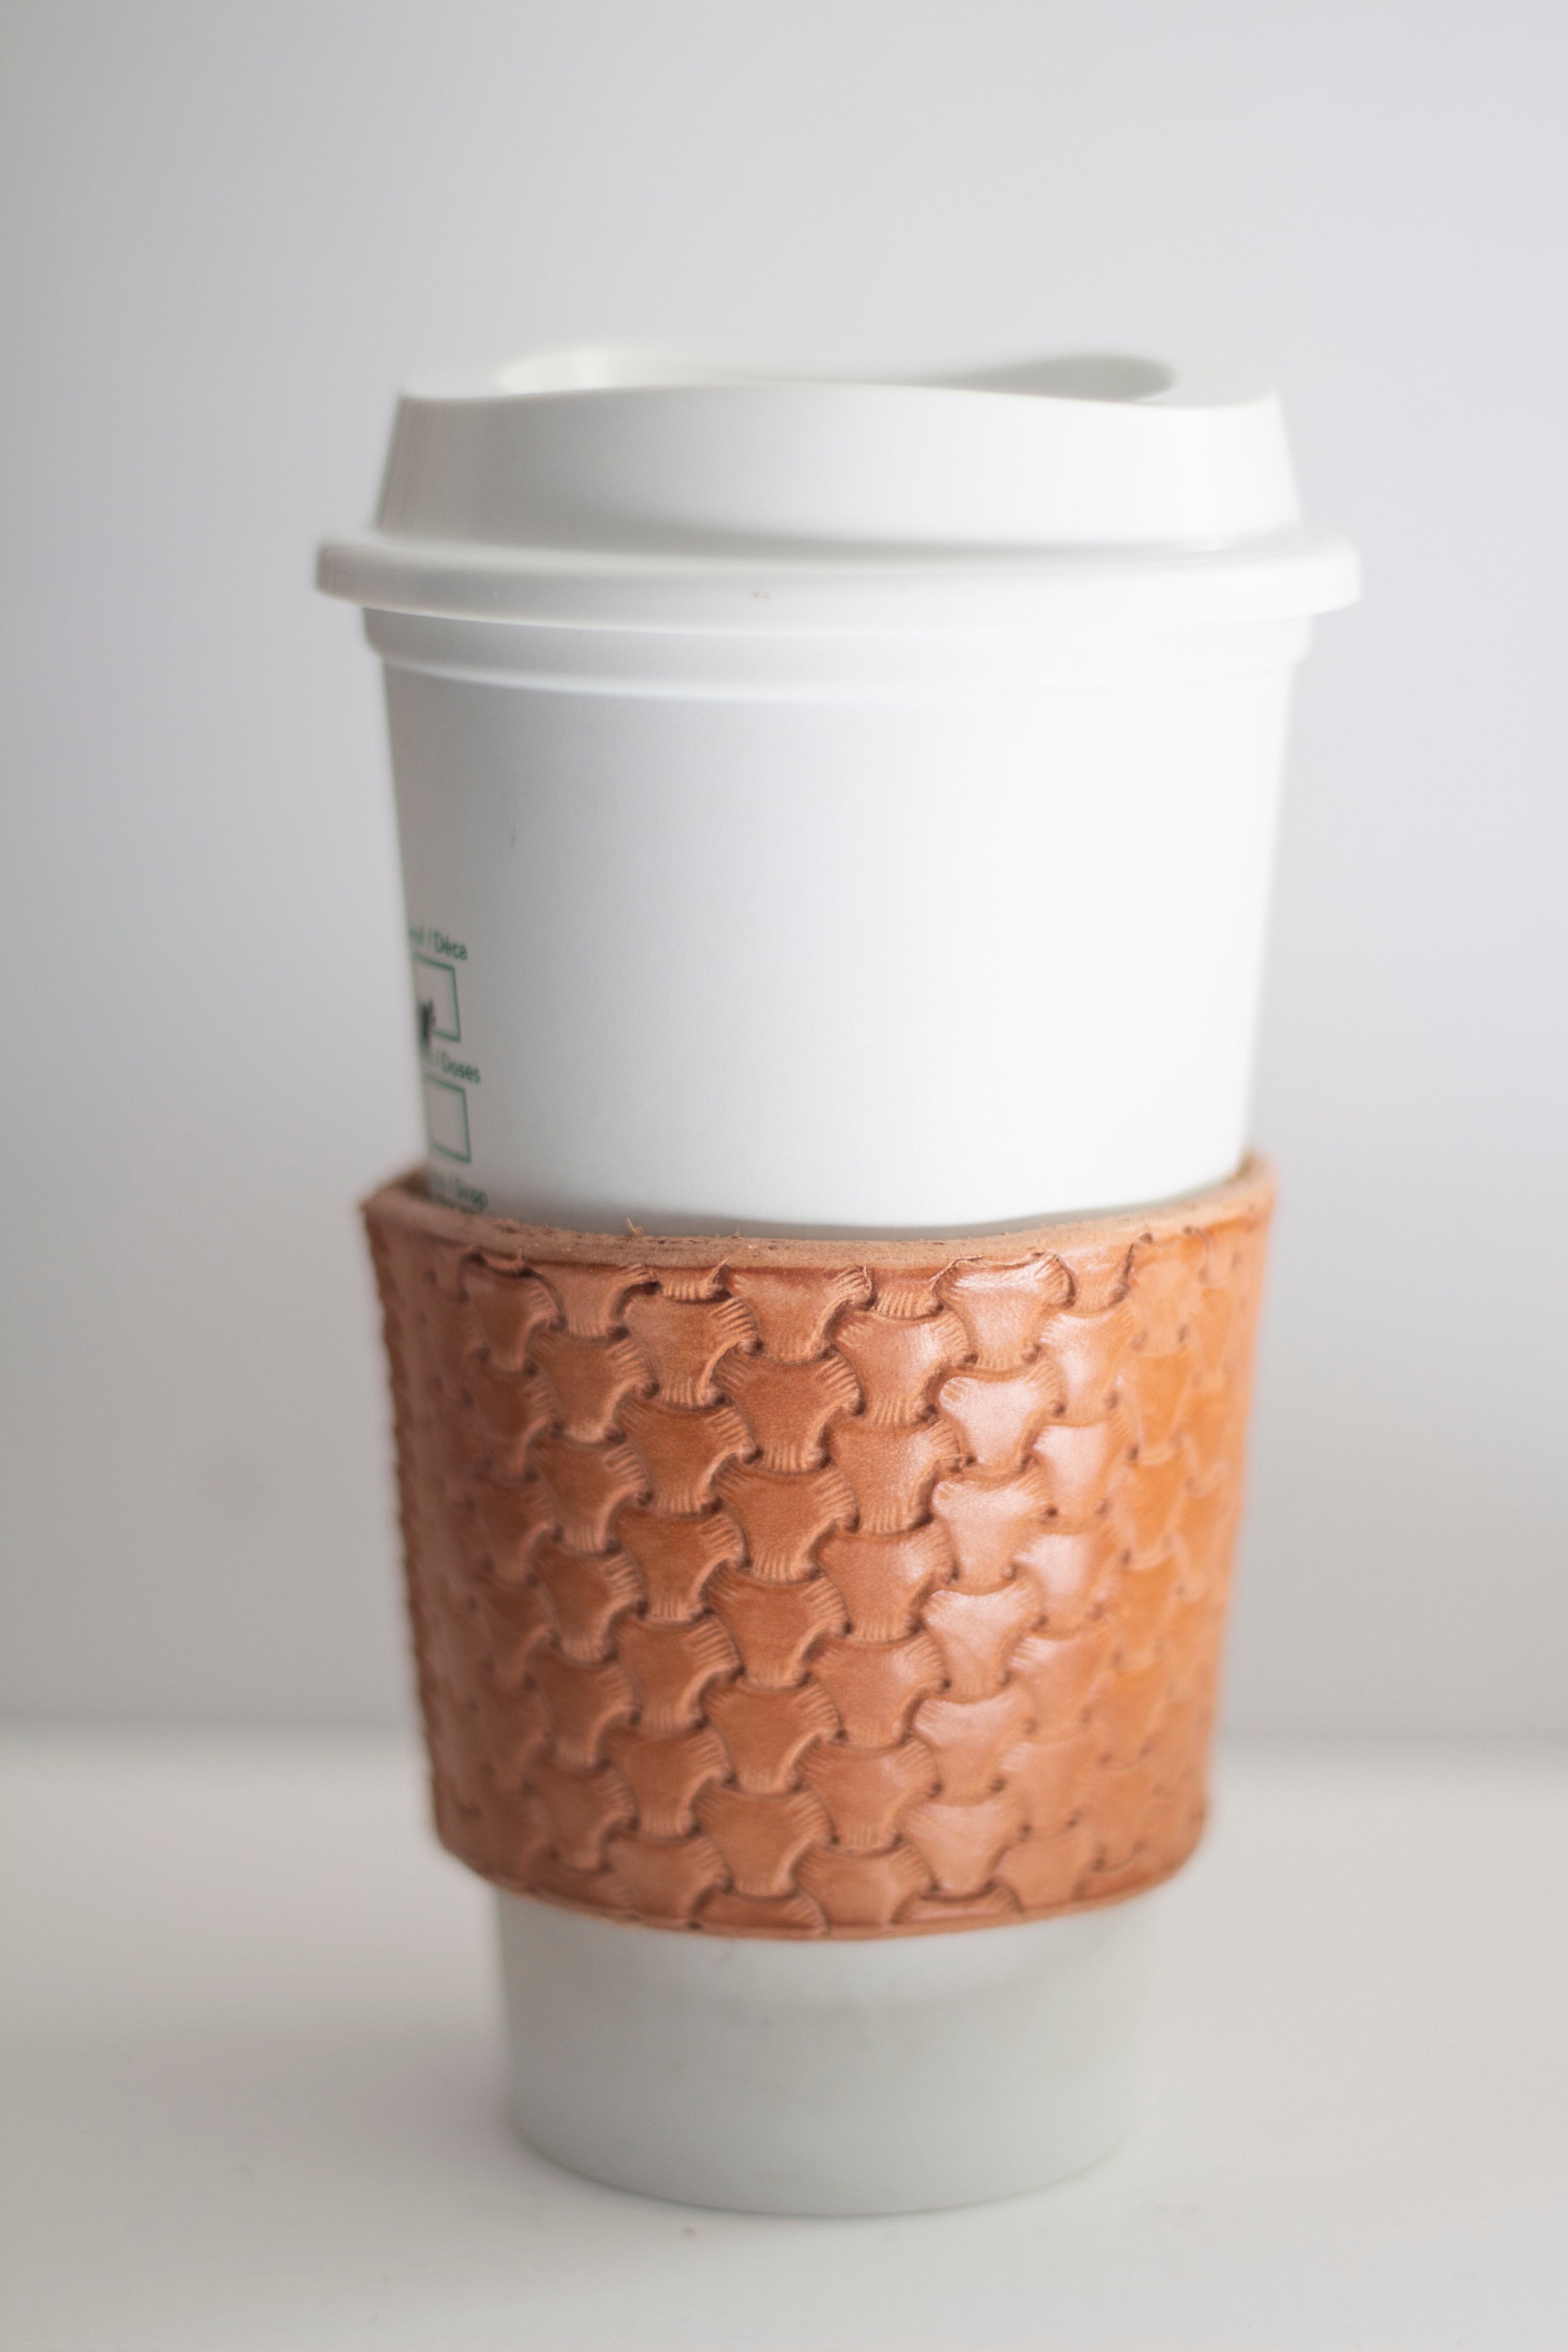 Premium Leather Calf Takeaway Cup Holder/sleeve, Reuasble Coffee